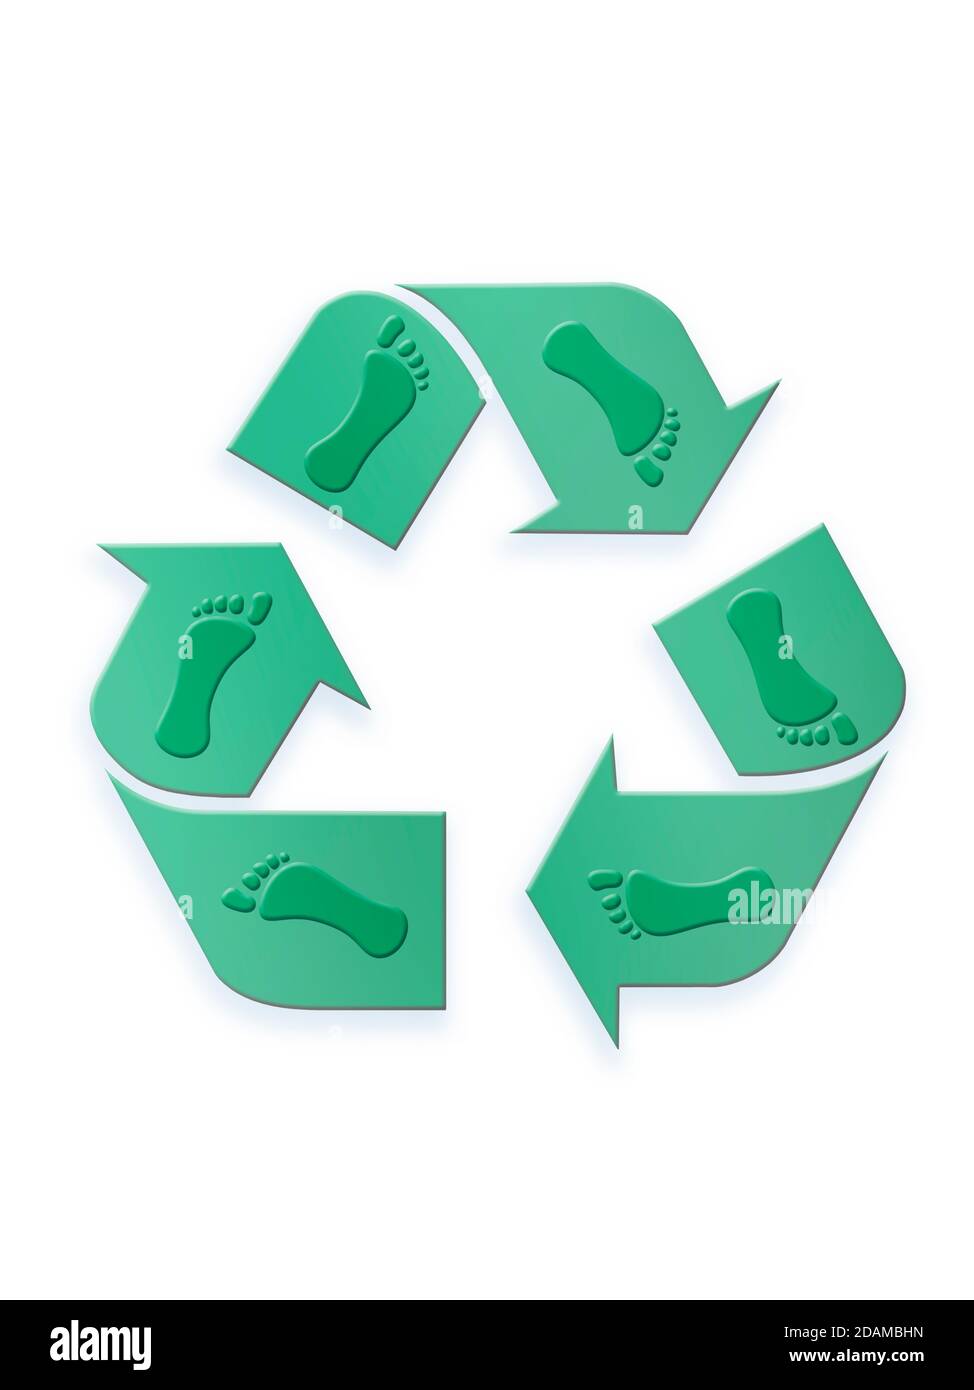 Recycling symbol with footprints, illustration. Stock Photo